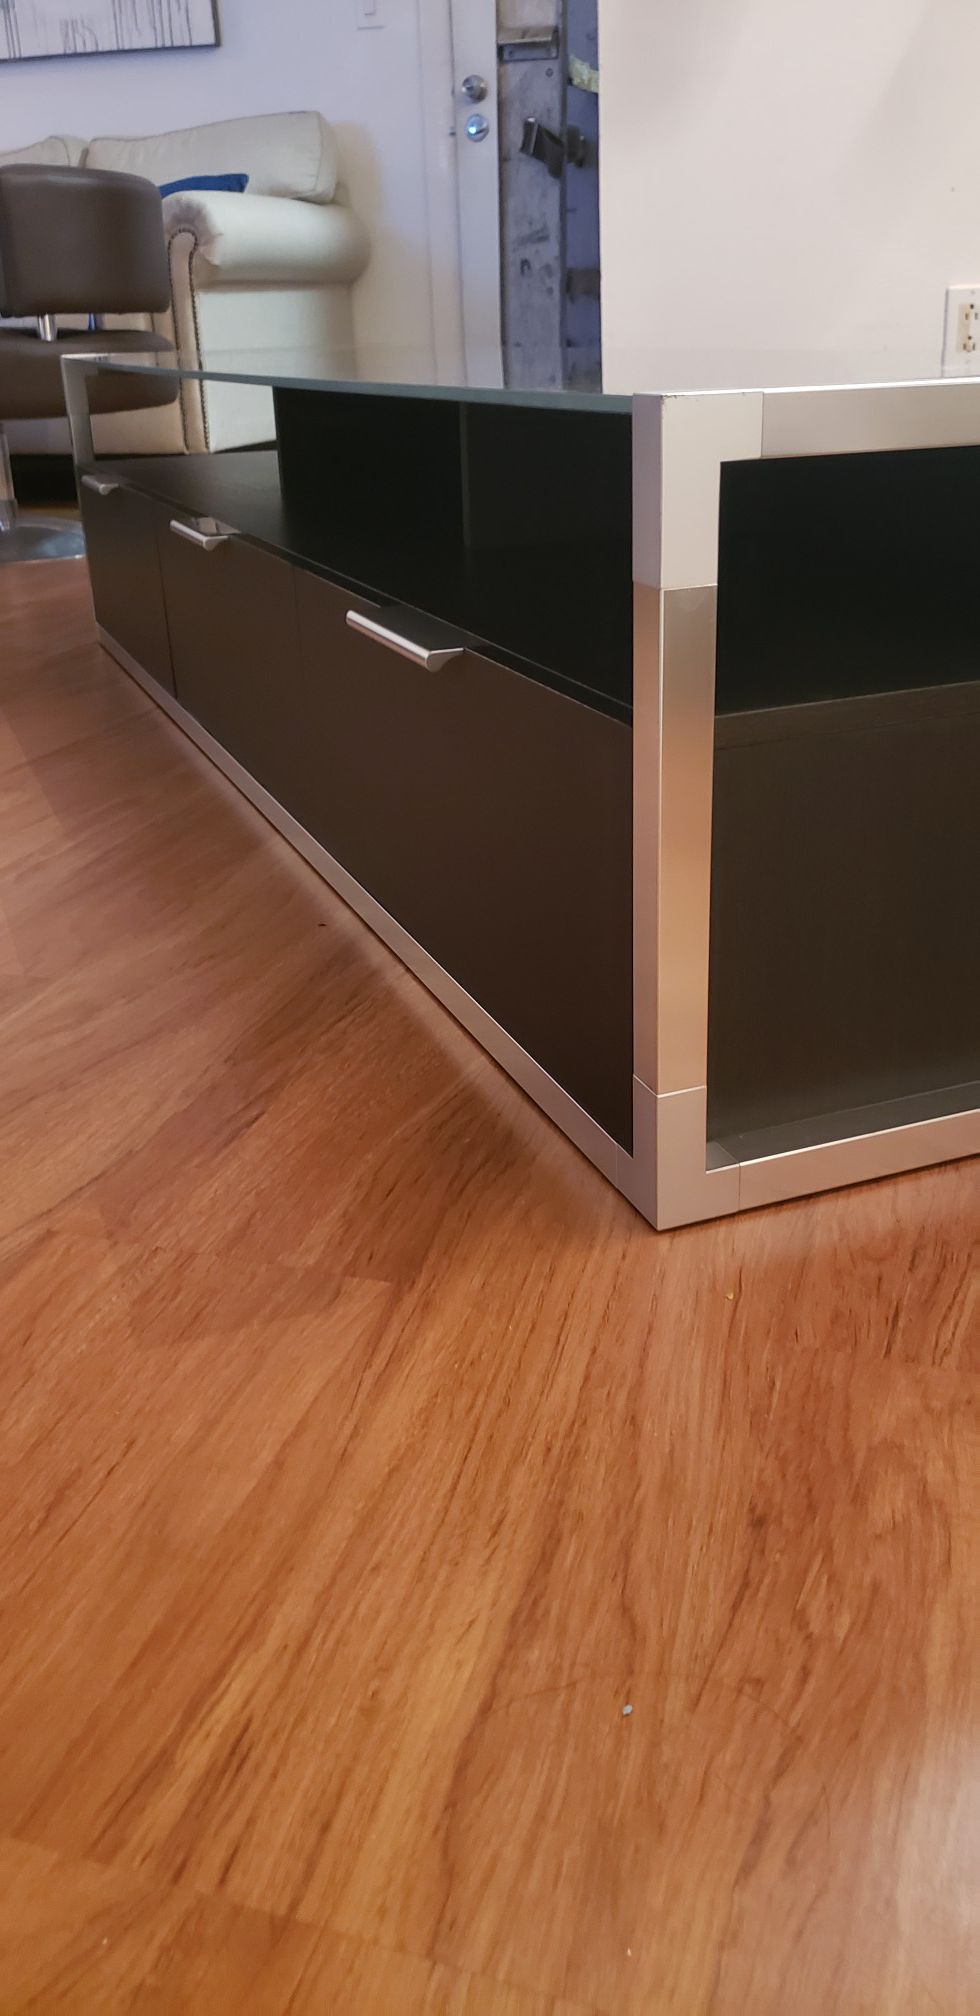 New new new!!!! Tv stand perfect conditions!!!